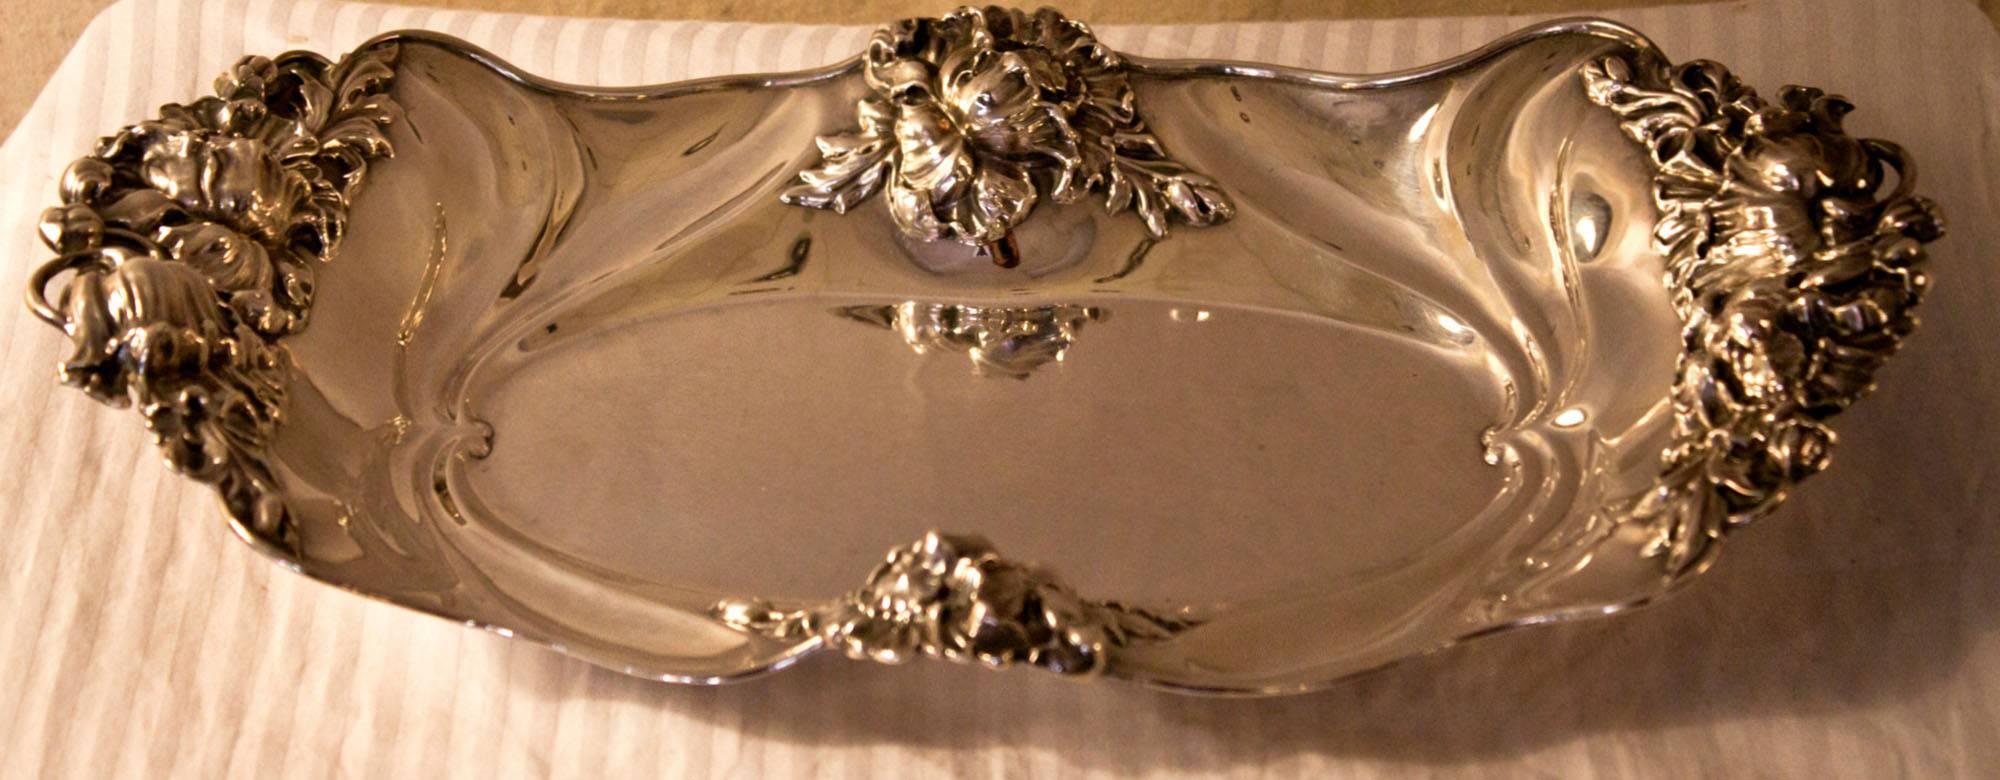 Art Nouveau Sterling Silver Bread Tray Opium Poppies 3